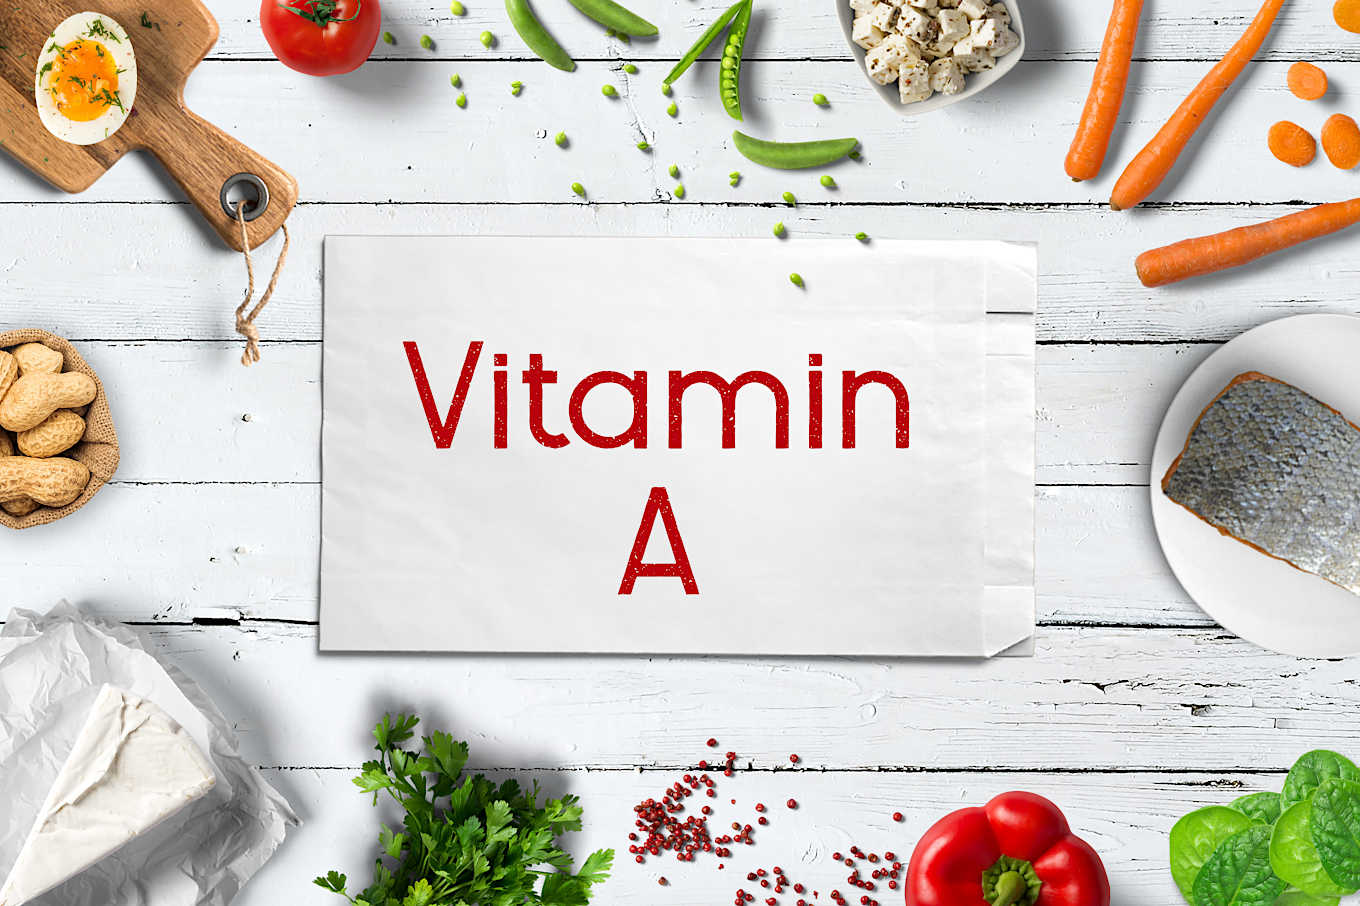 what does vitamin a do - vitamin a deficiency signs and symptoms